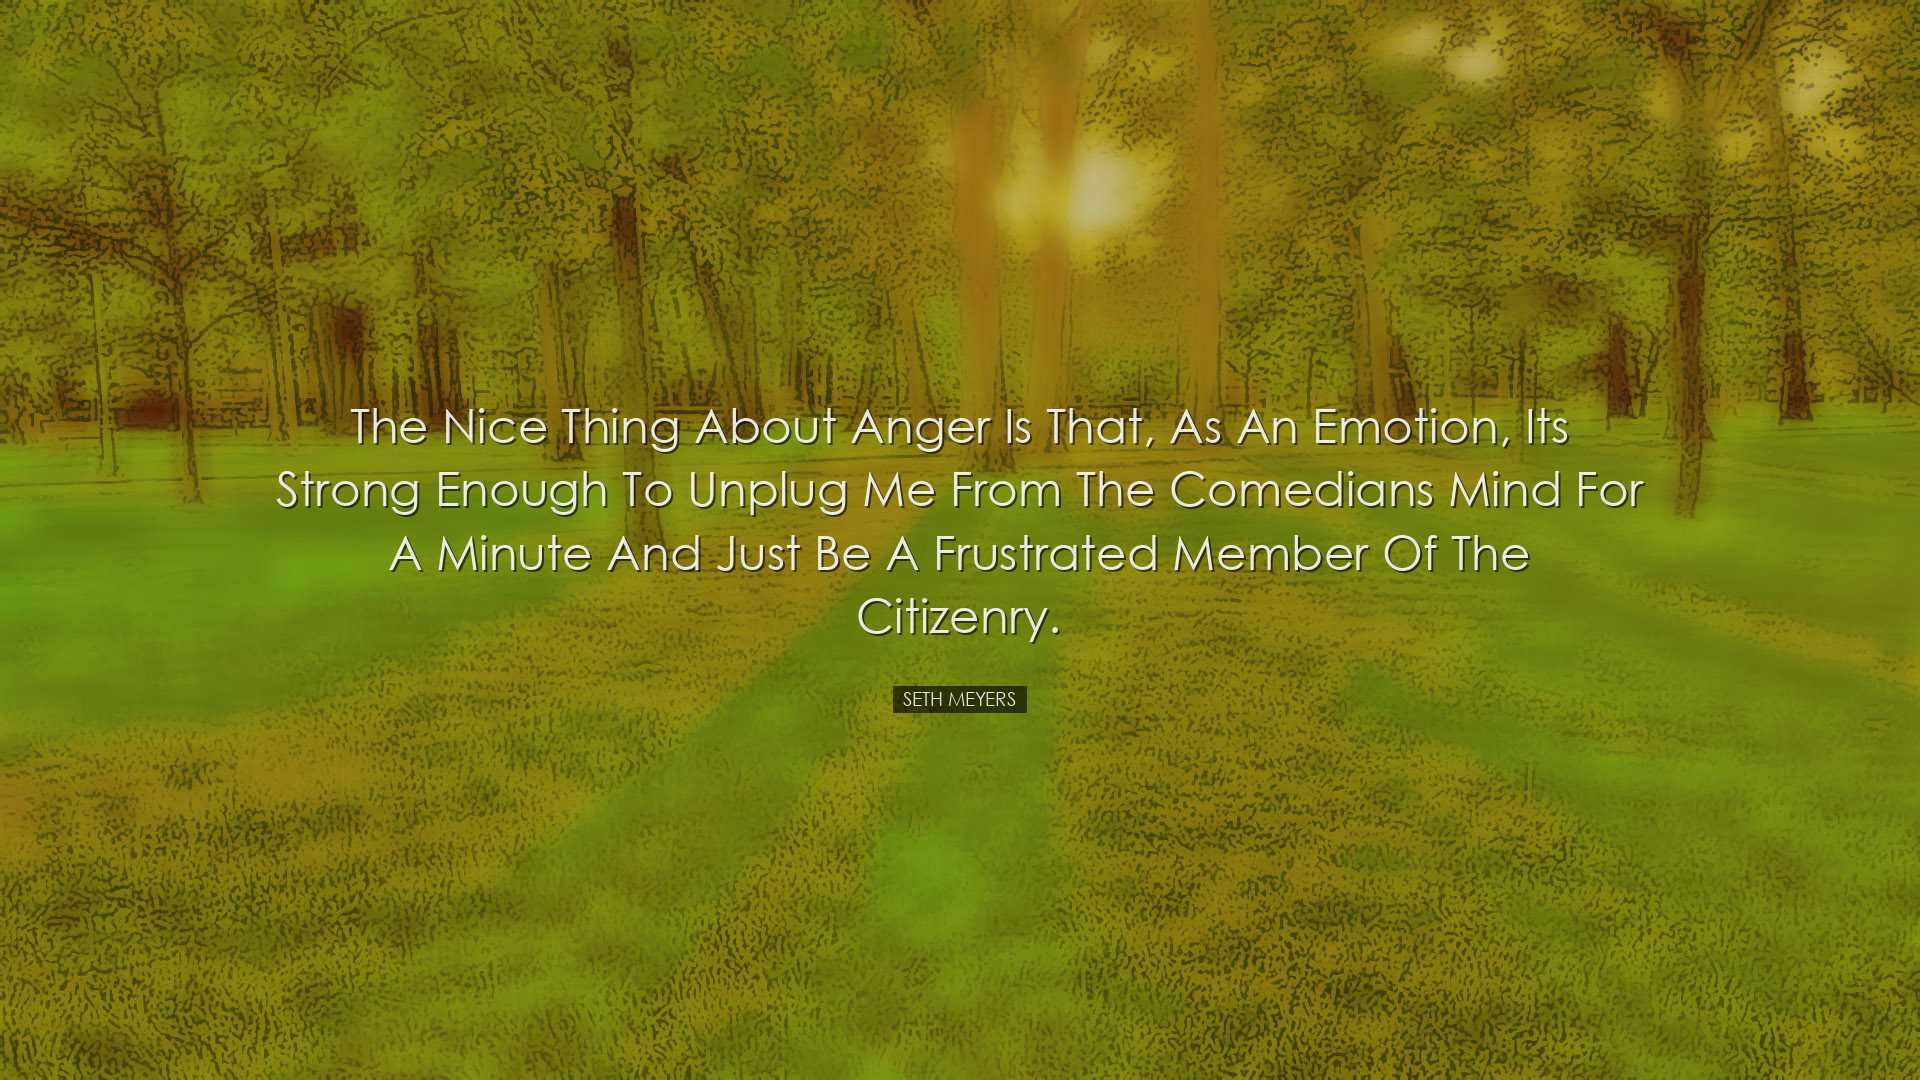 The nice thing about anger is that, as an emotion, its strong enou